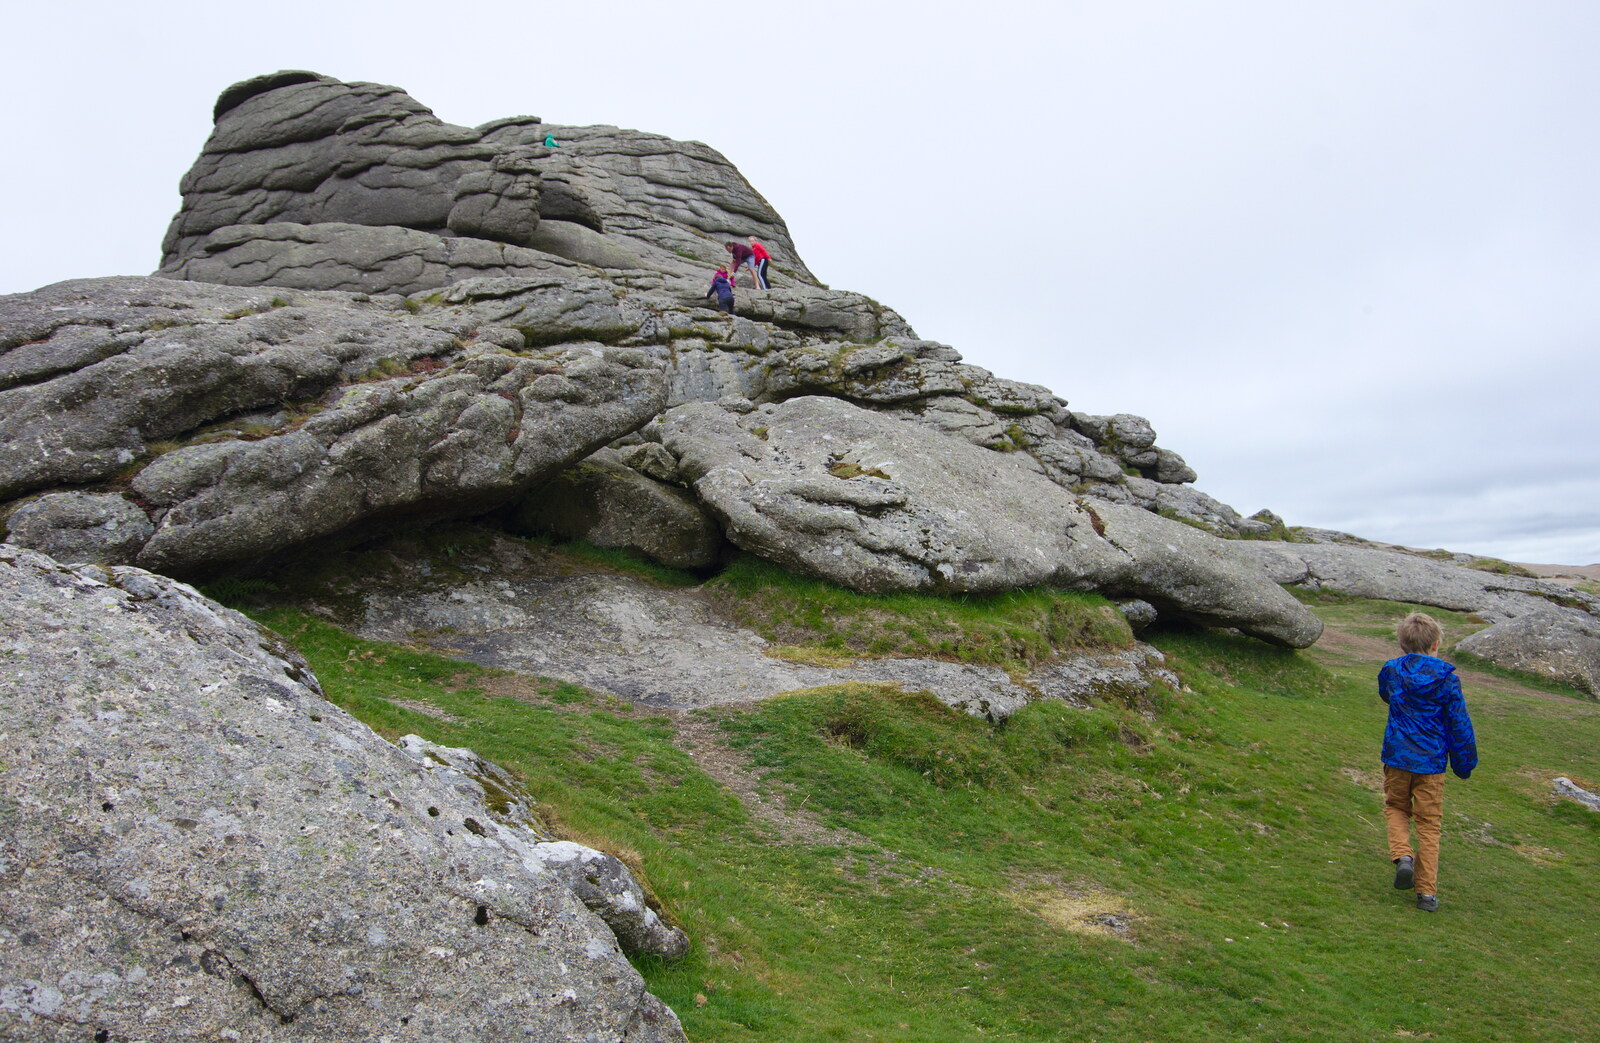 Harry roams around from The Tom Cobley and a Return to Haytor, Bovey Tracey, Devon - 27th May 2019